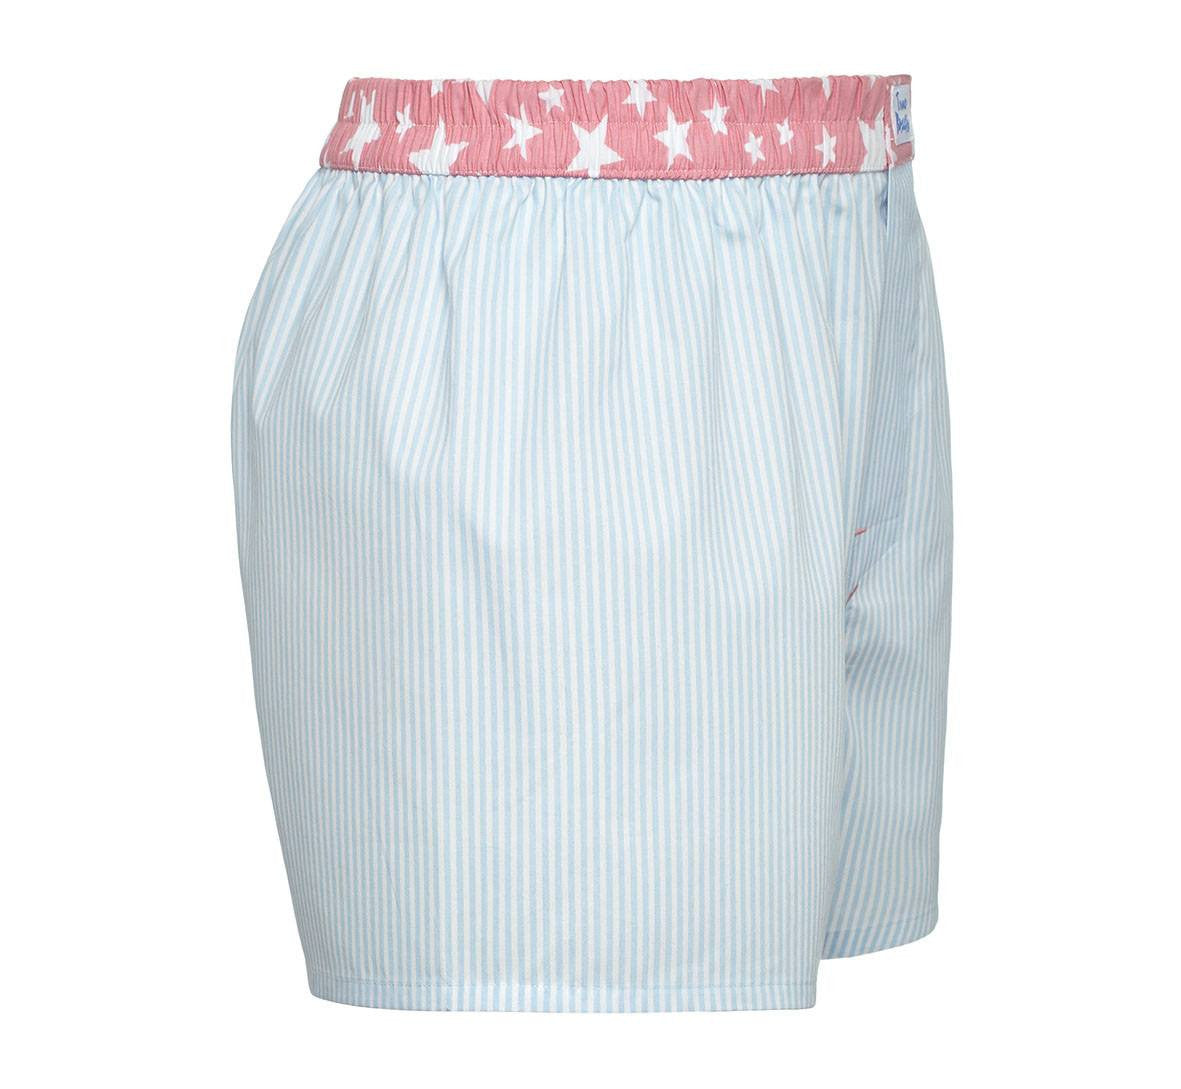 Champion - blue stripes with pink stars Boxer Short - True Boxers